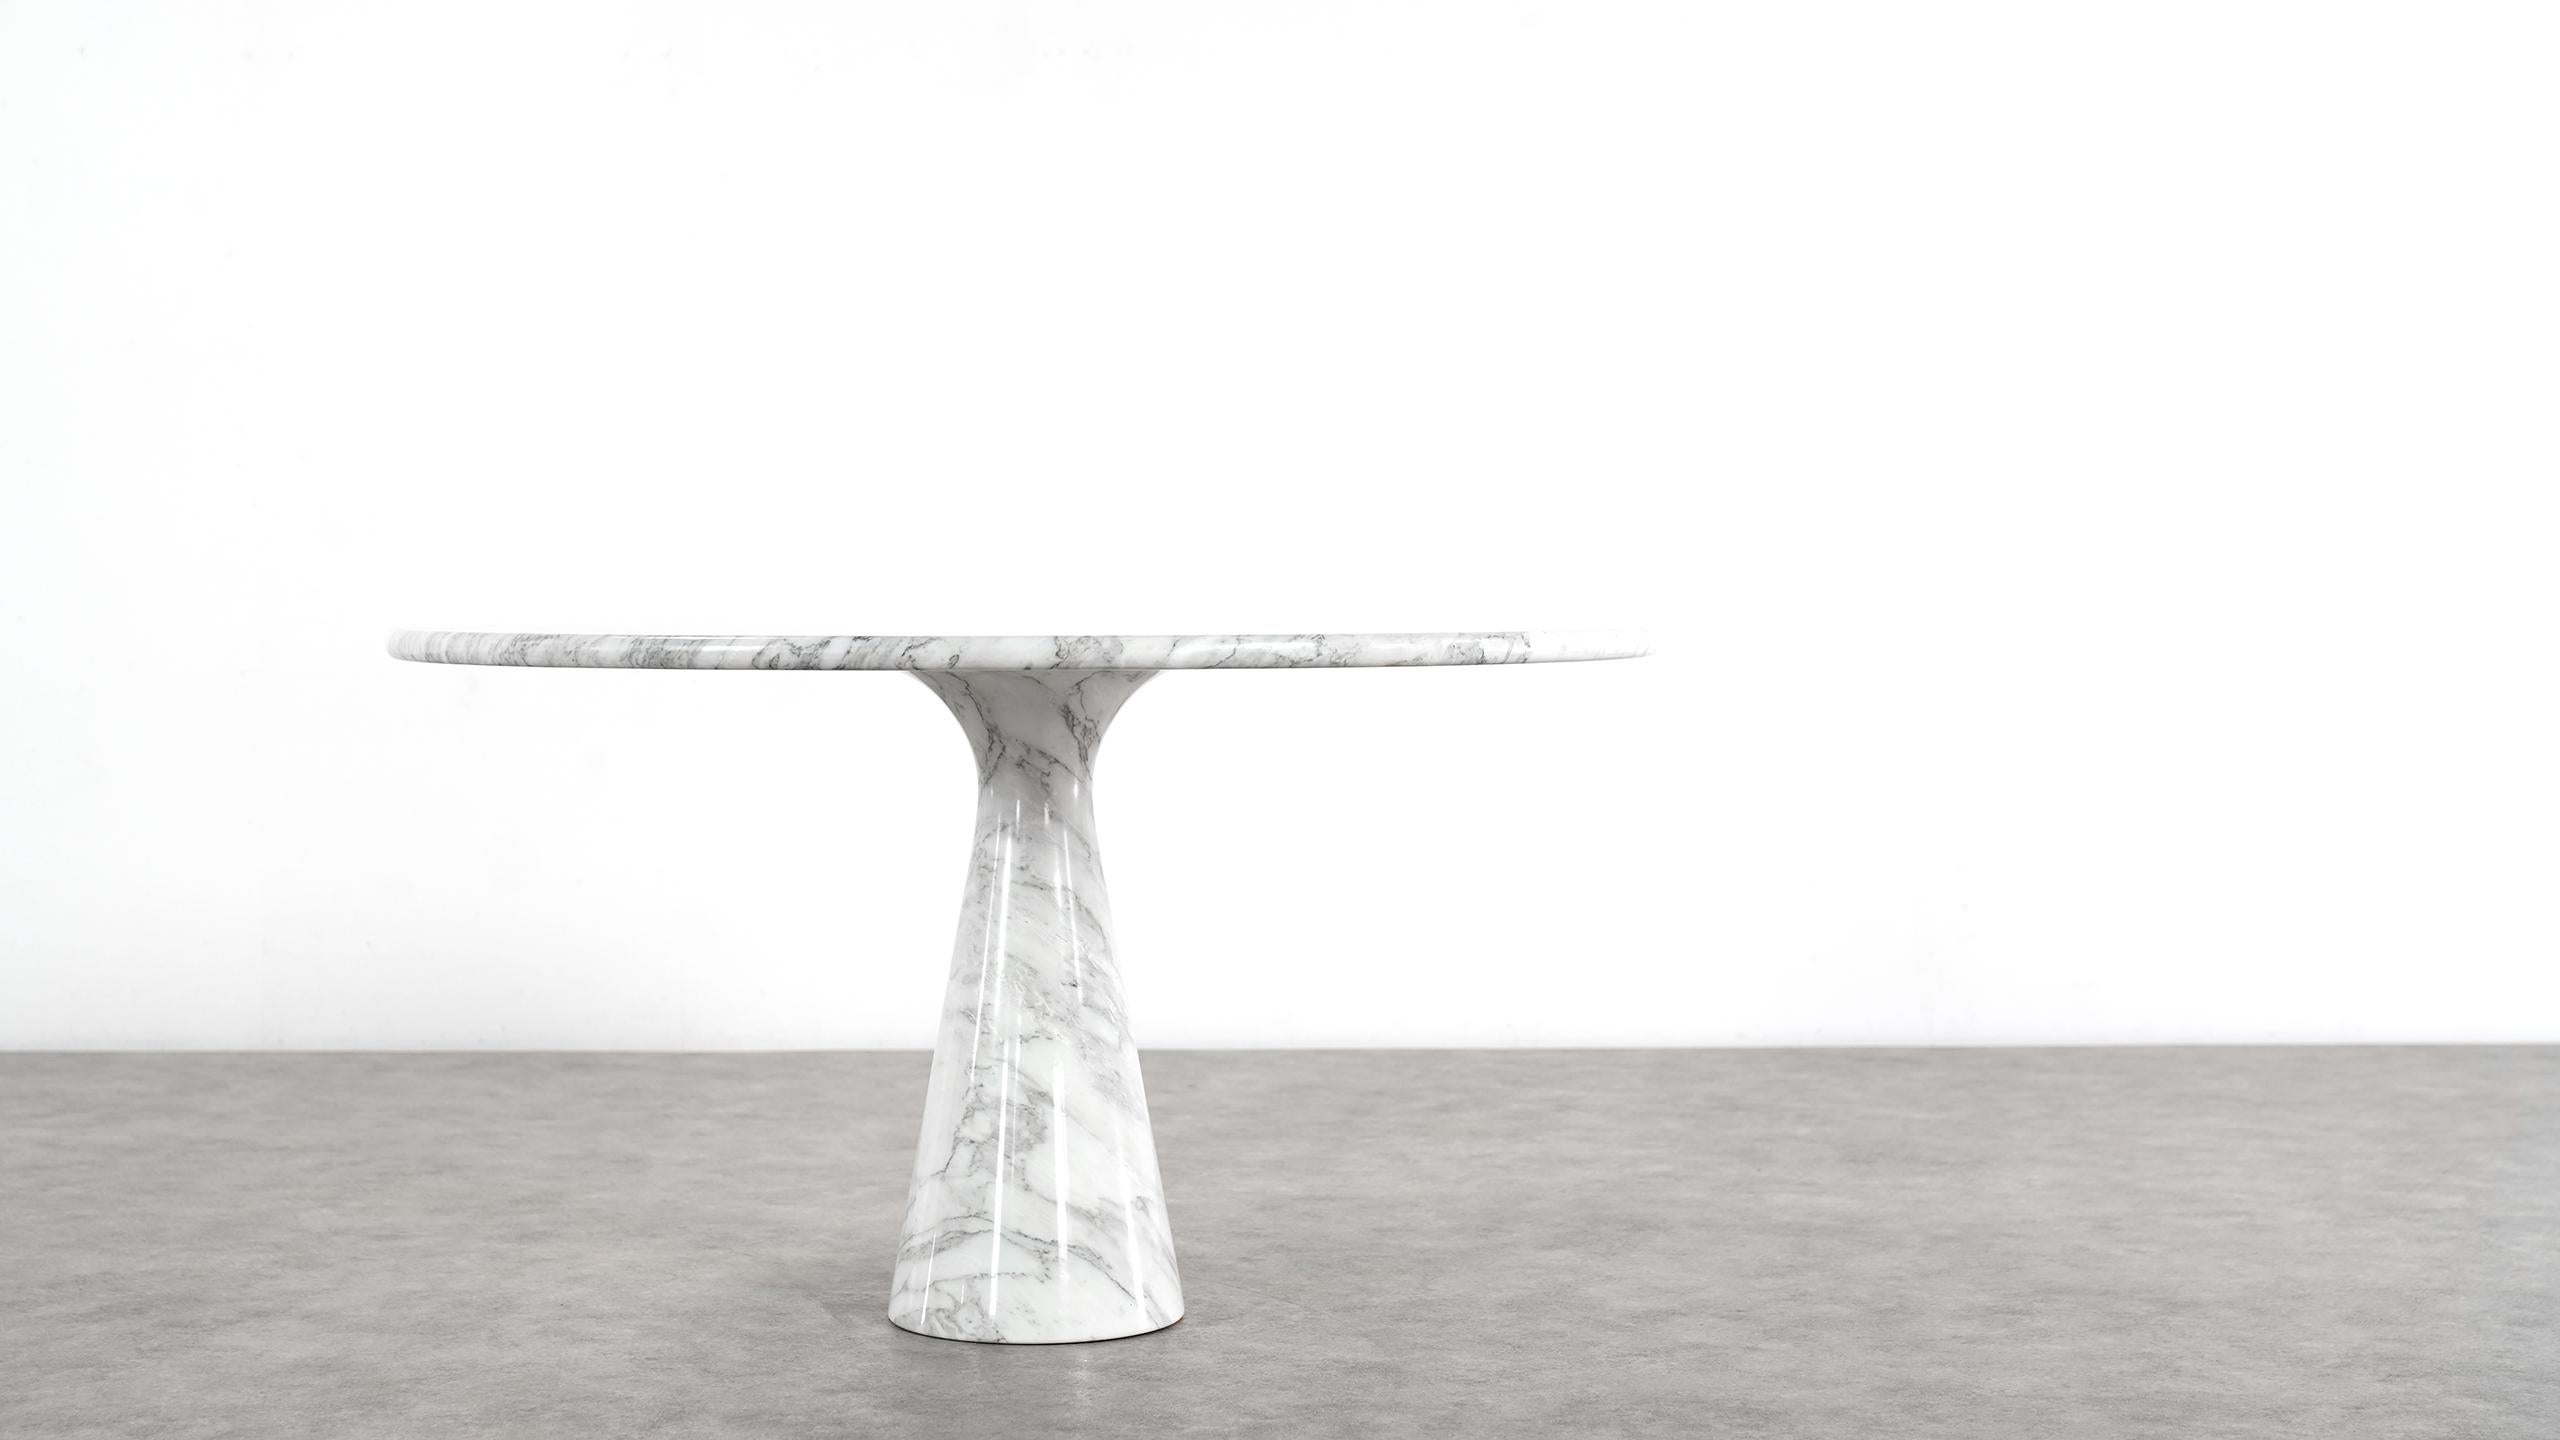 Important and beautiful M1 marble dining table by Angelo Mangiarotti, in perfect condition!
Made by Skipper, Italy.

Measures:
Ø 127.50cm / 71cm high - one of the greatest tables ever made!

Publications:
Catalogue of the Exhibition of Angelo